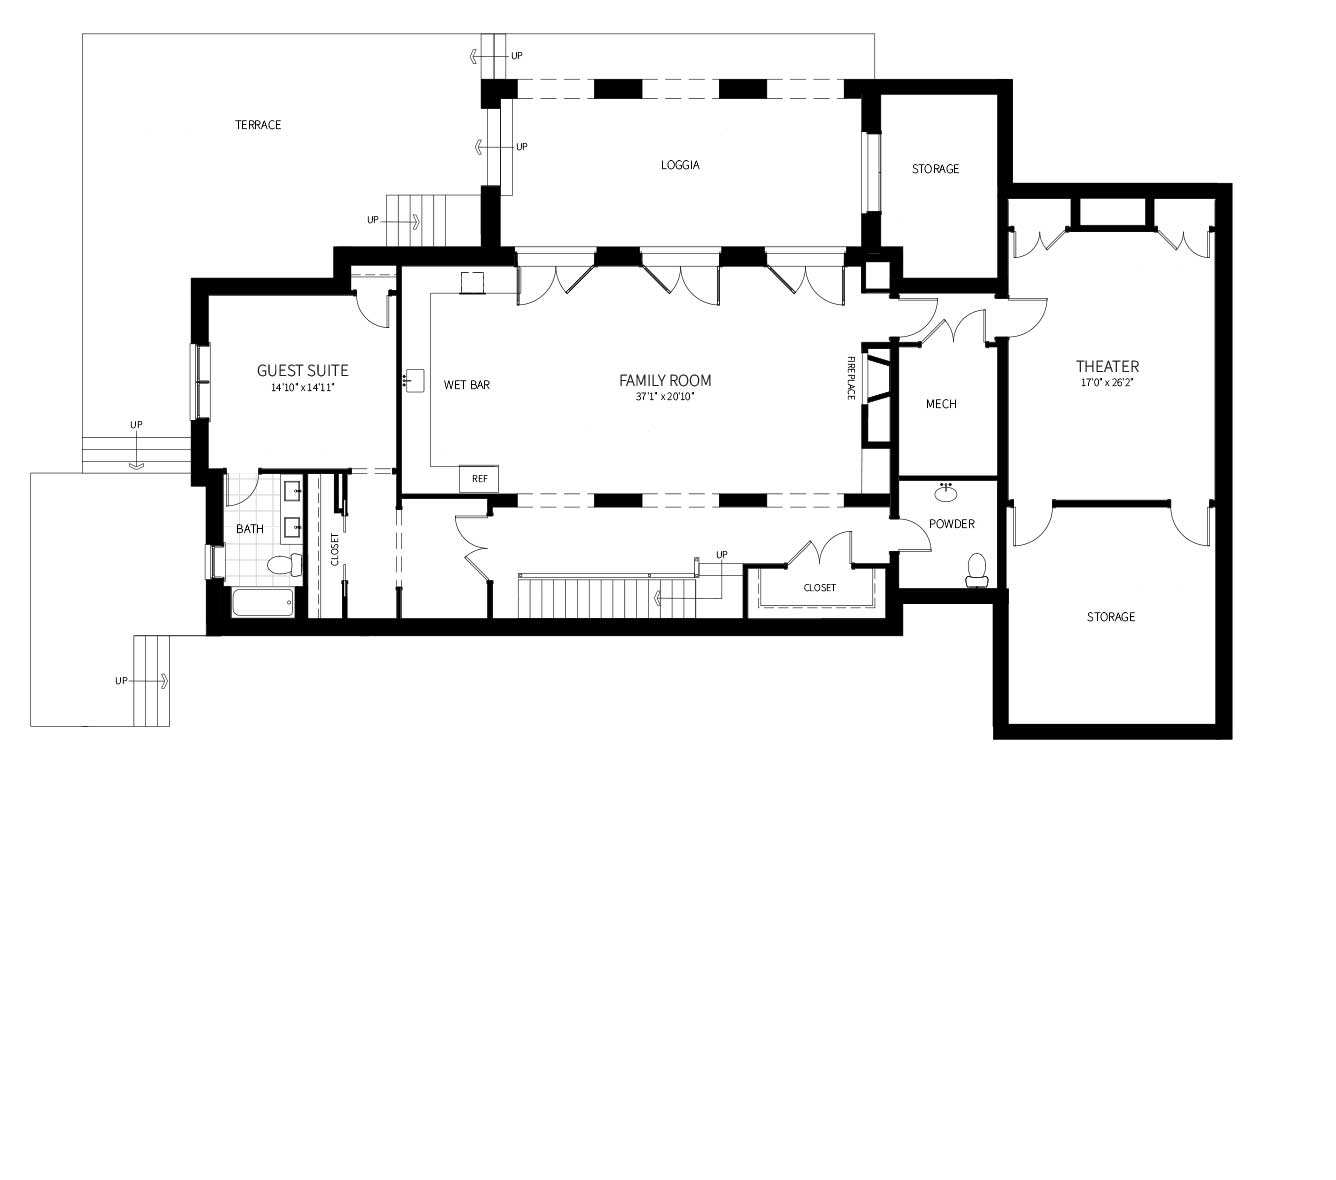 The lower level plan for the home proposed, including a Family Room, Theater, Full Guest Suite and Loggia.